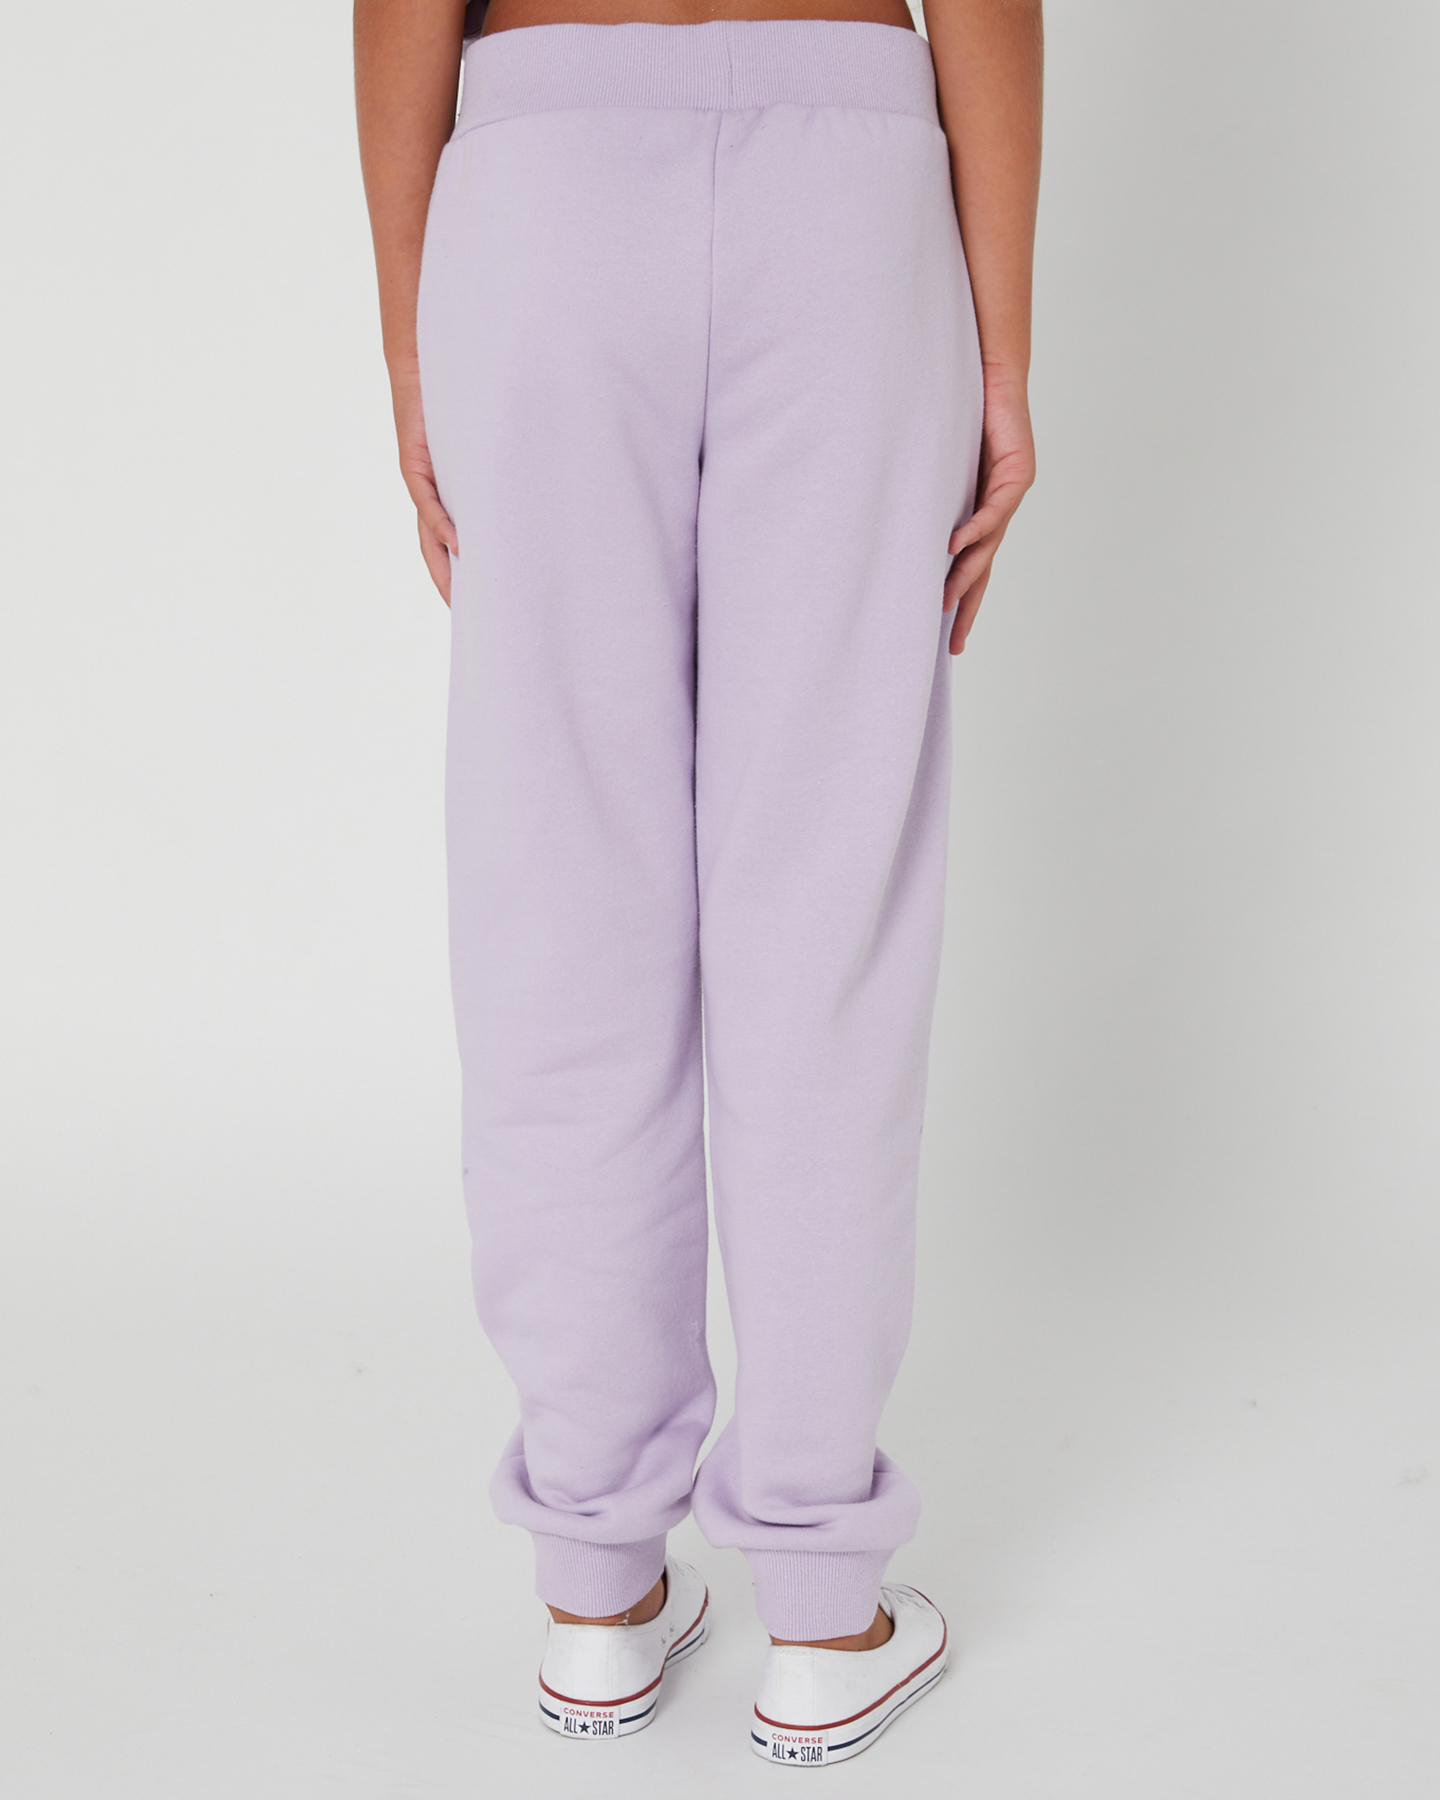 Swell Girls Classic Track Pant - Teens - Lilac | SurfStitch